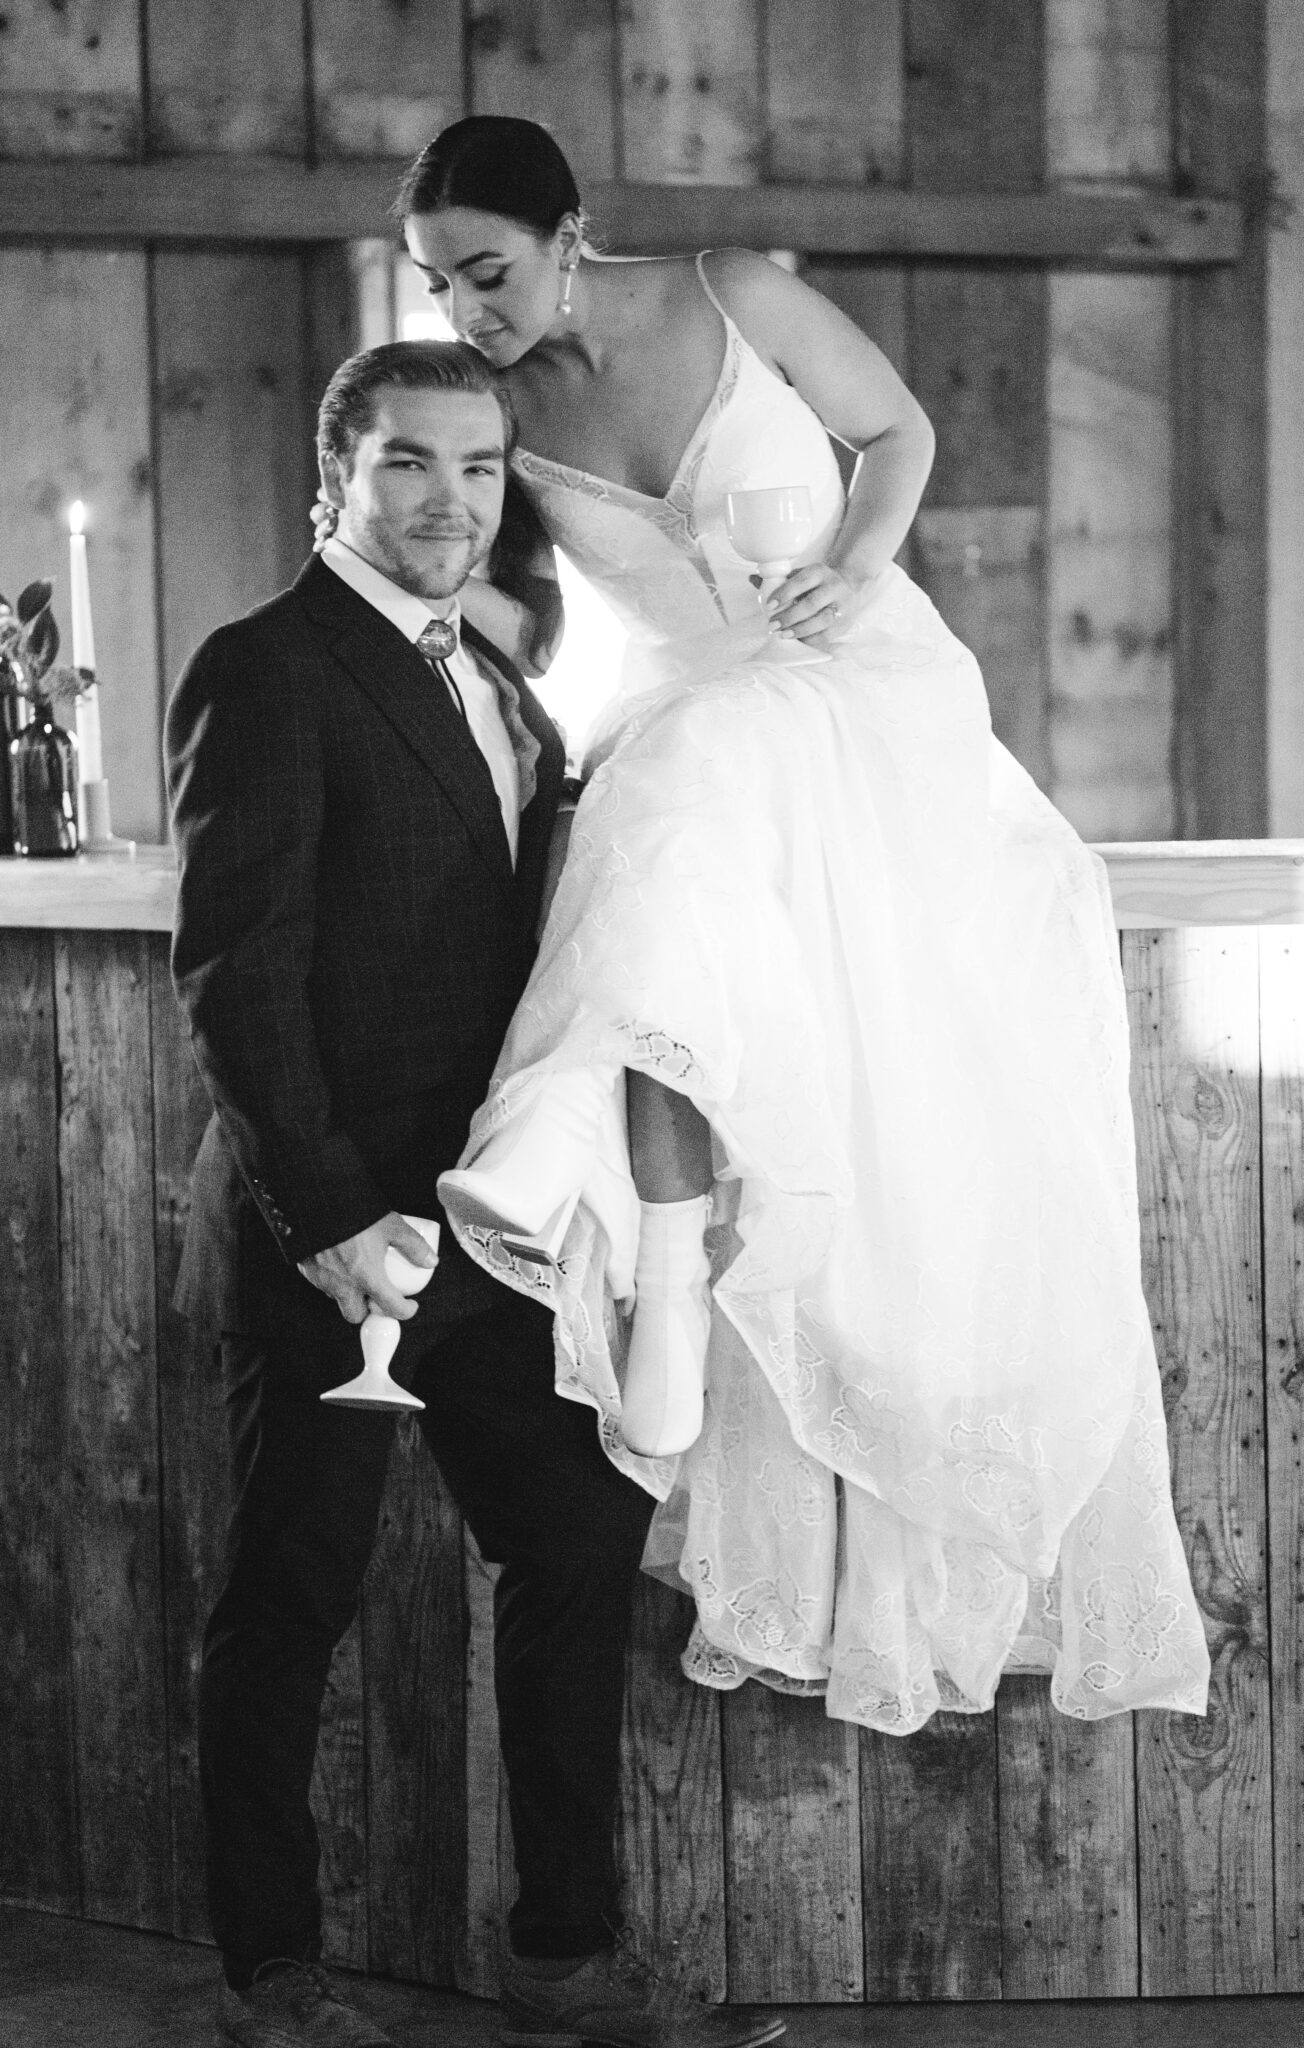 Wedding Inspiration With An Updated Take on Country Chic Wedding Style at Countryside Barn in Lethbridge Alberta, bride and groom wedding portrait in black and white photography